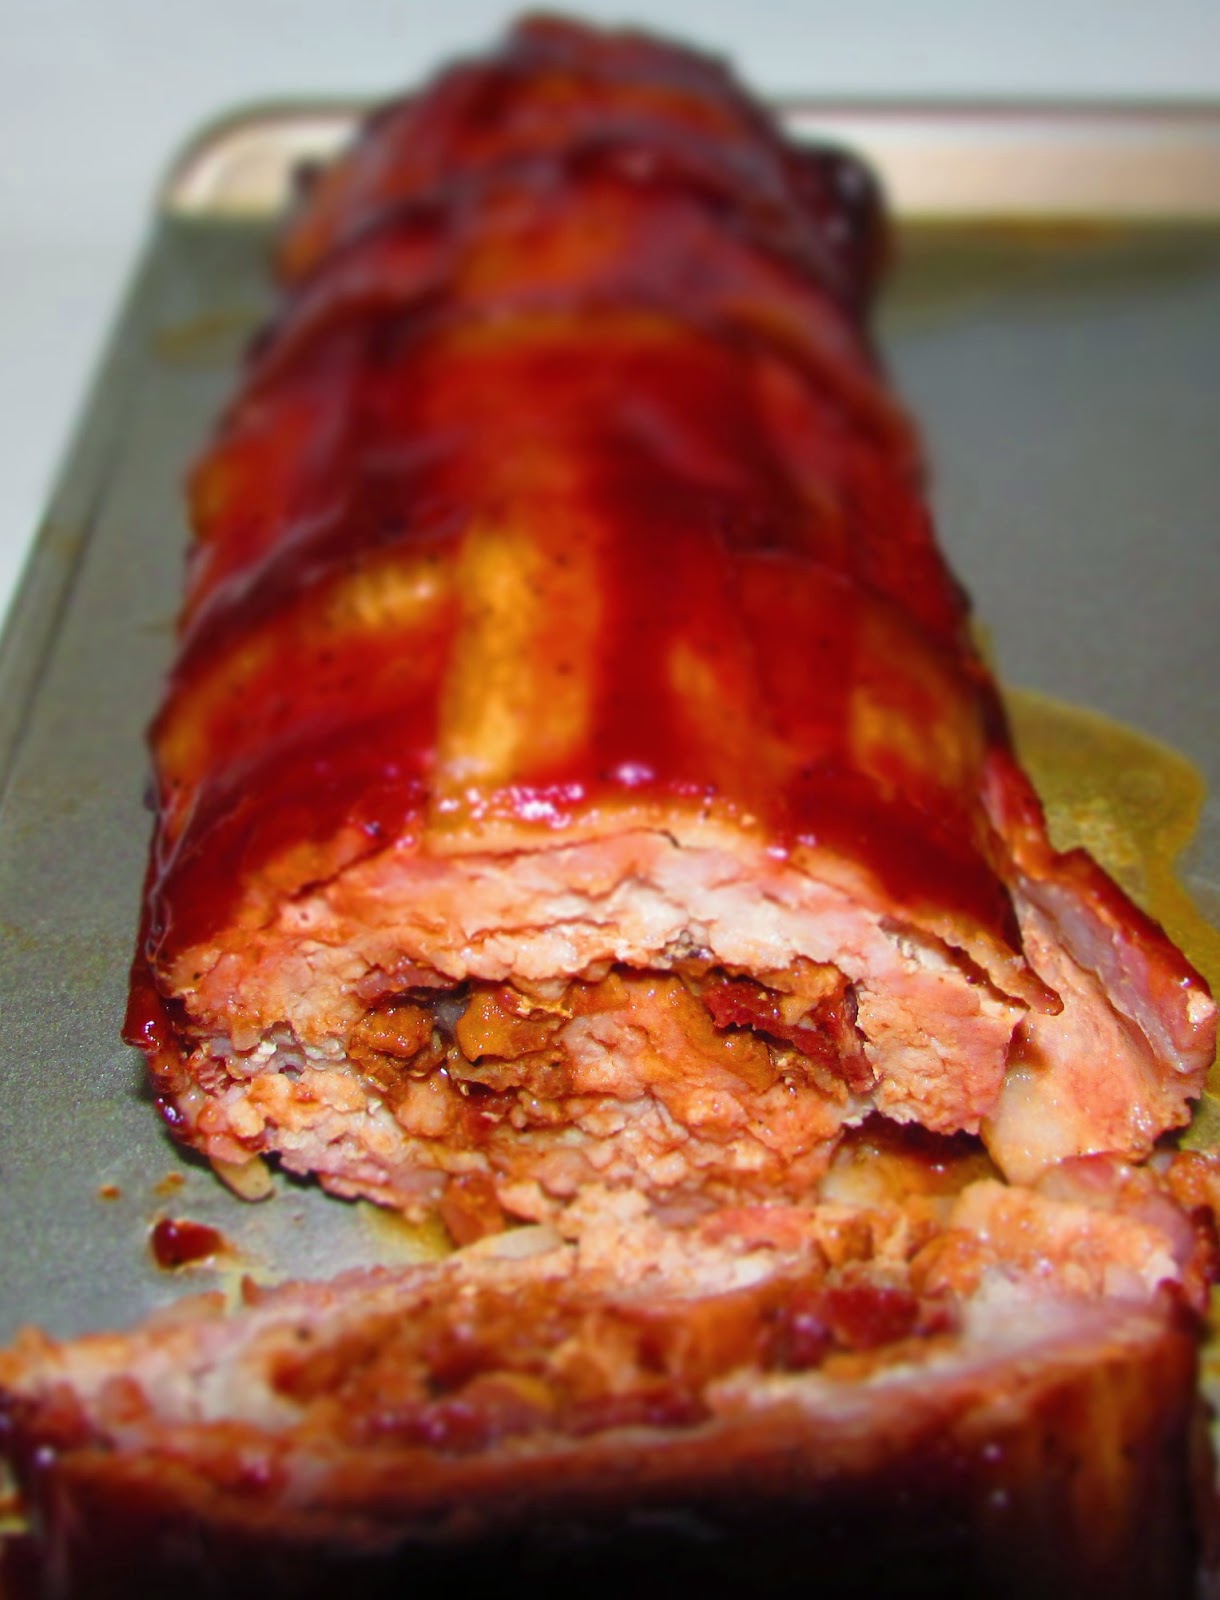 bbq bacon explosion being cut into slices showing crumbled bacon center and bacon lattice weave exterior.